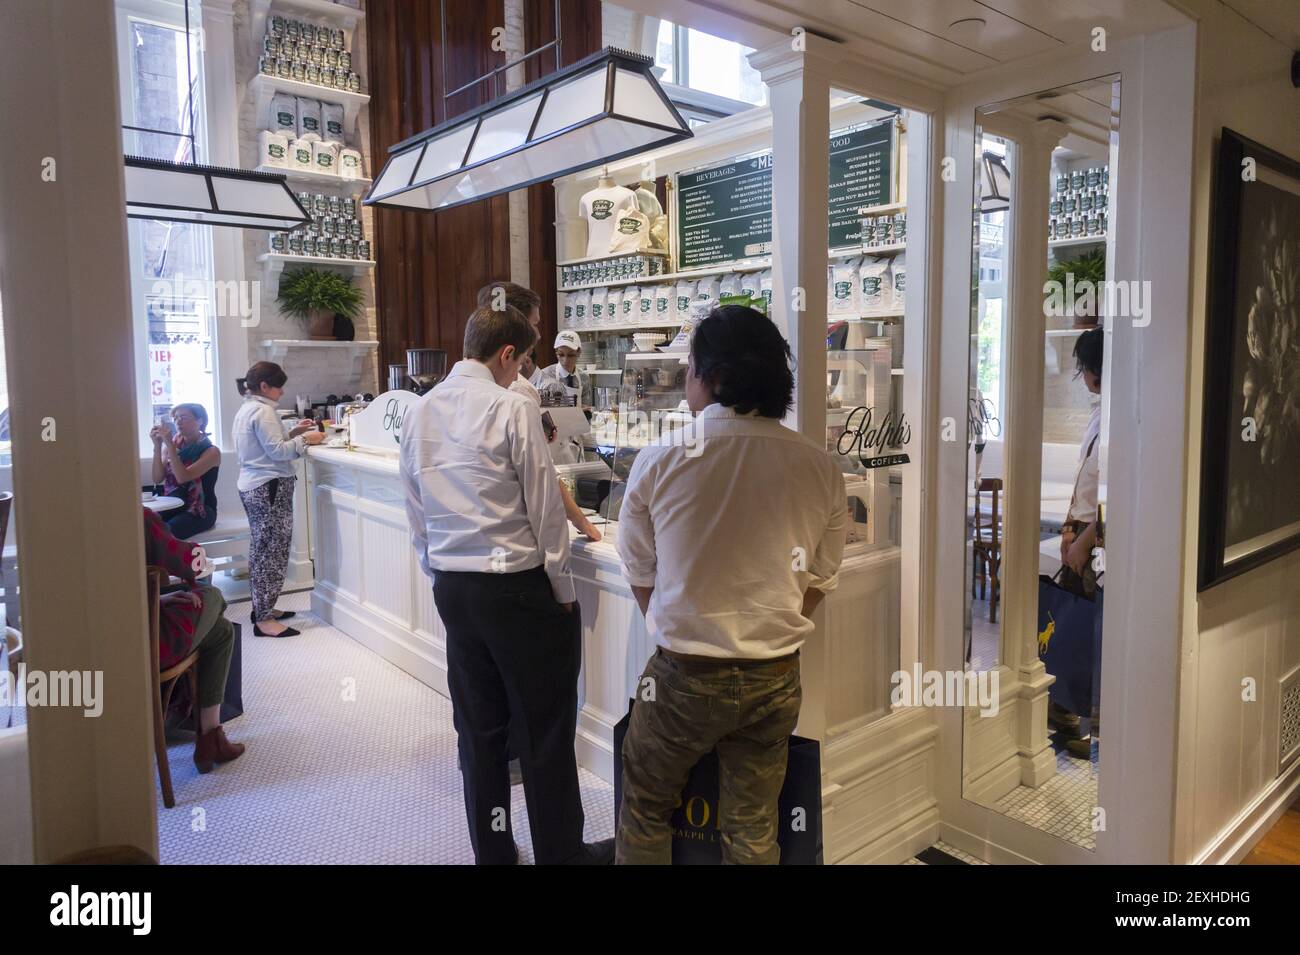 Customers on line at Ralph's Coffee in the brand new Polo Ralph Lauren  store of Fifth Avenue in New York on Friday, September 12, 2014. The Ralph  Lauren Corp. announced that it